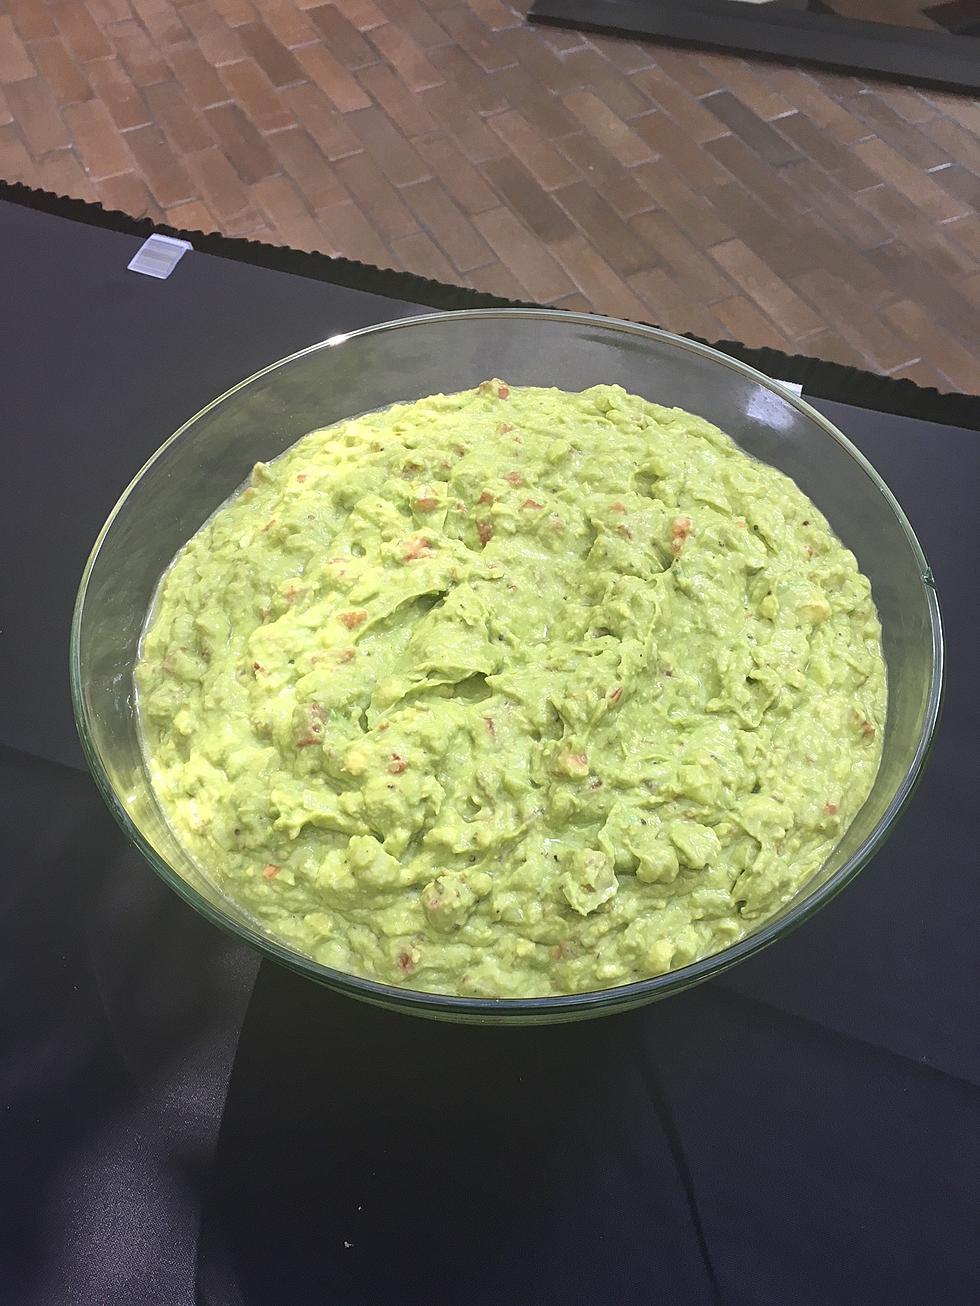 806 Health Tip: Why Guacamole is a Great Snack